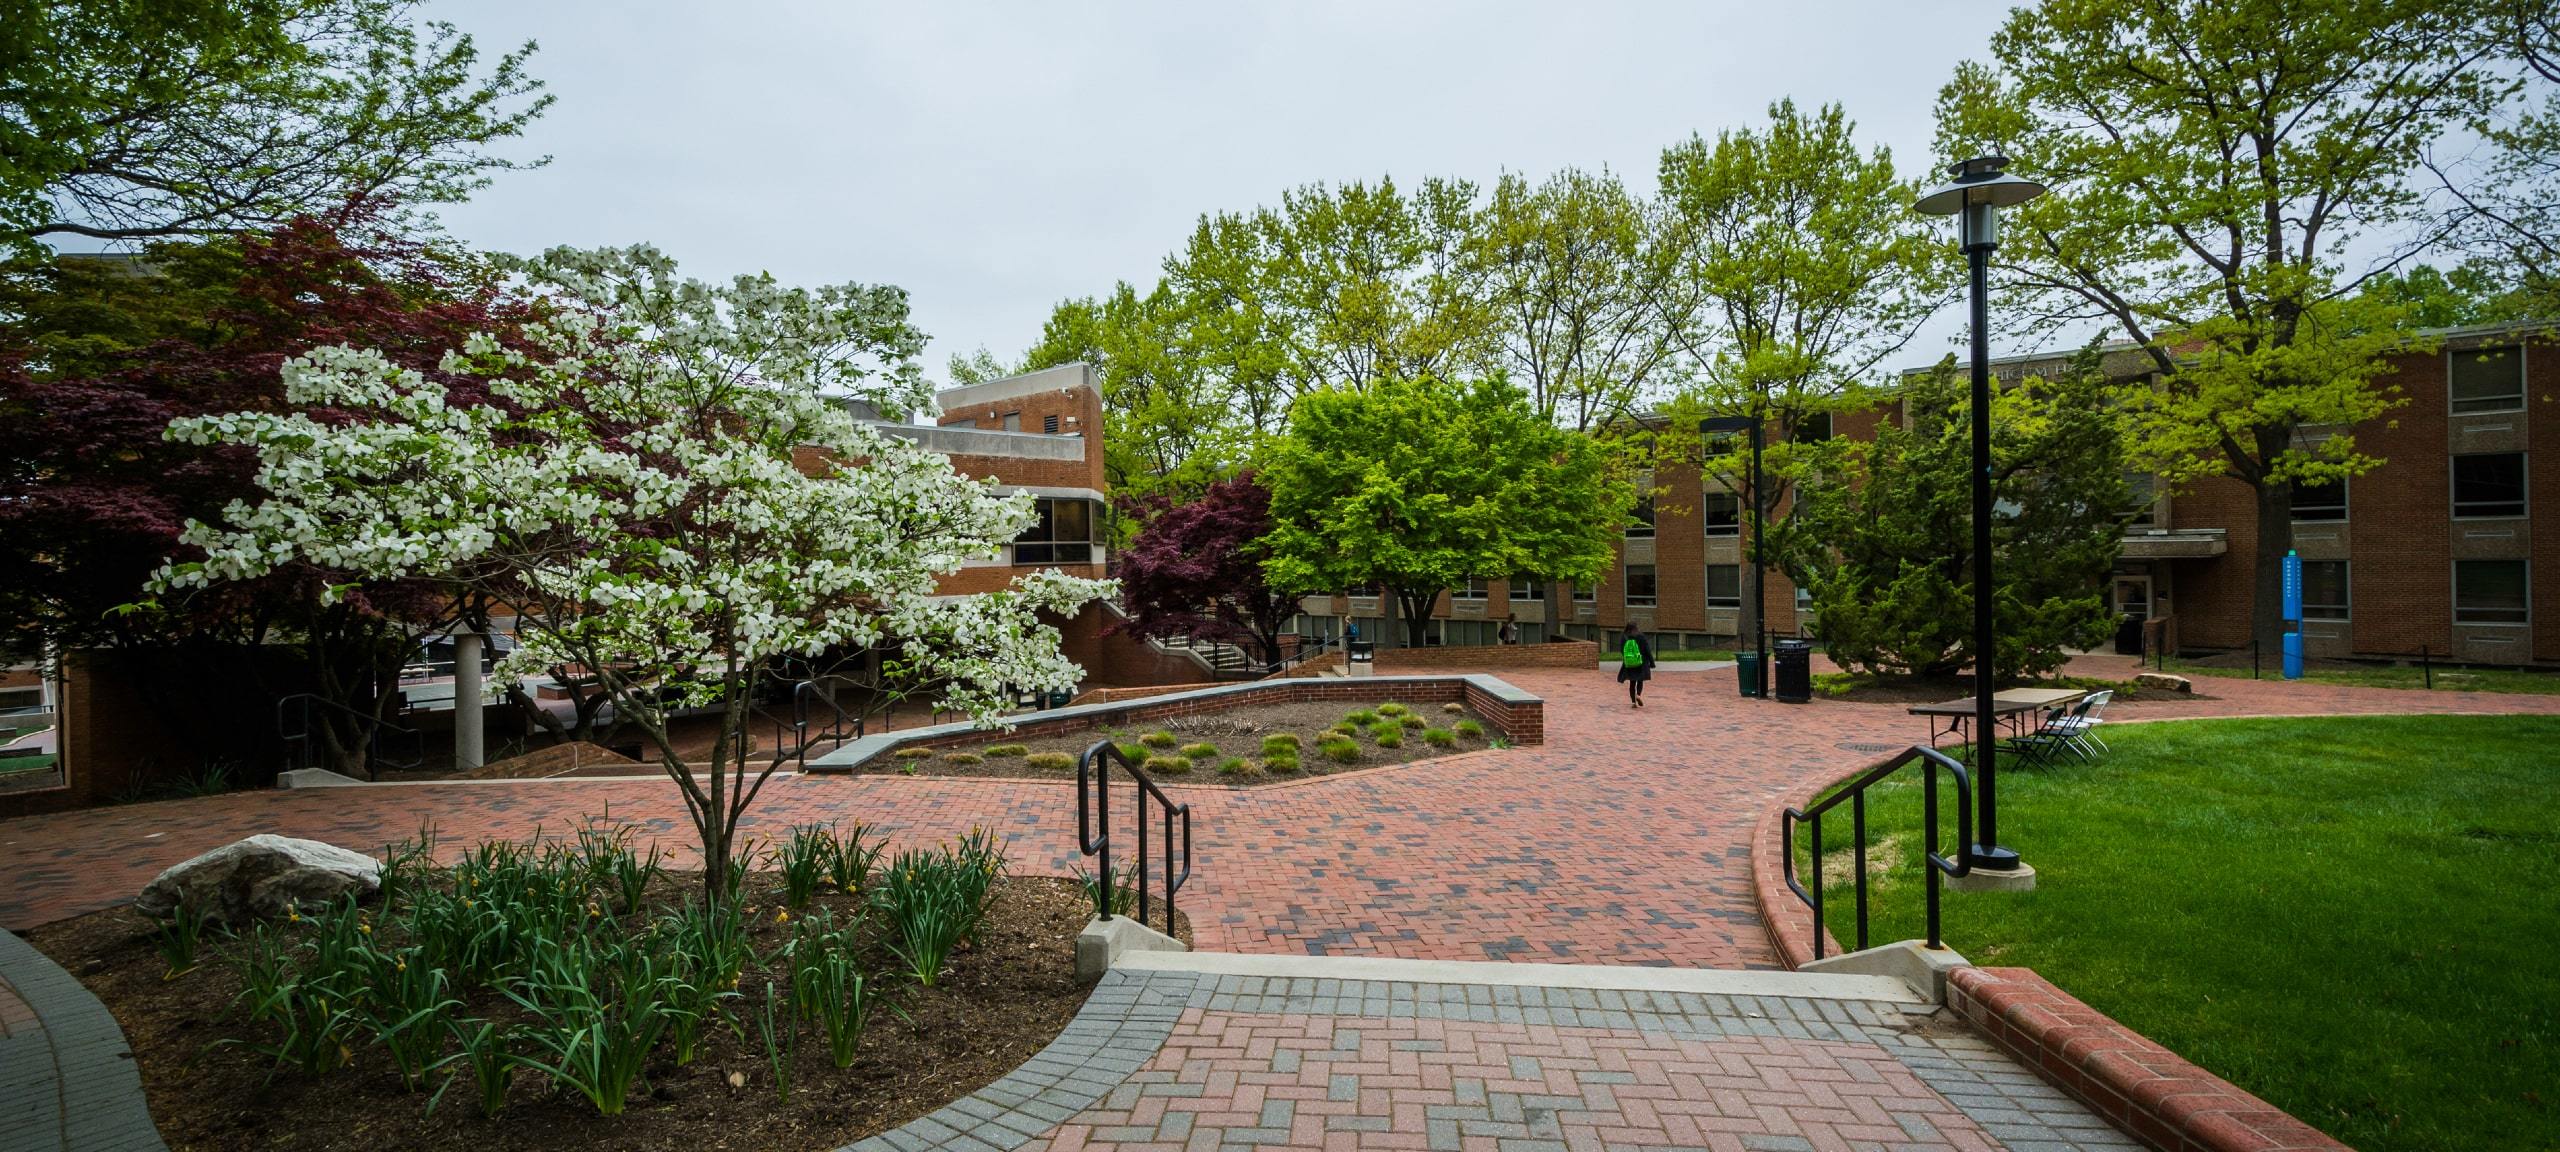 Towson University campus in Towson, Maryland